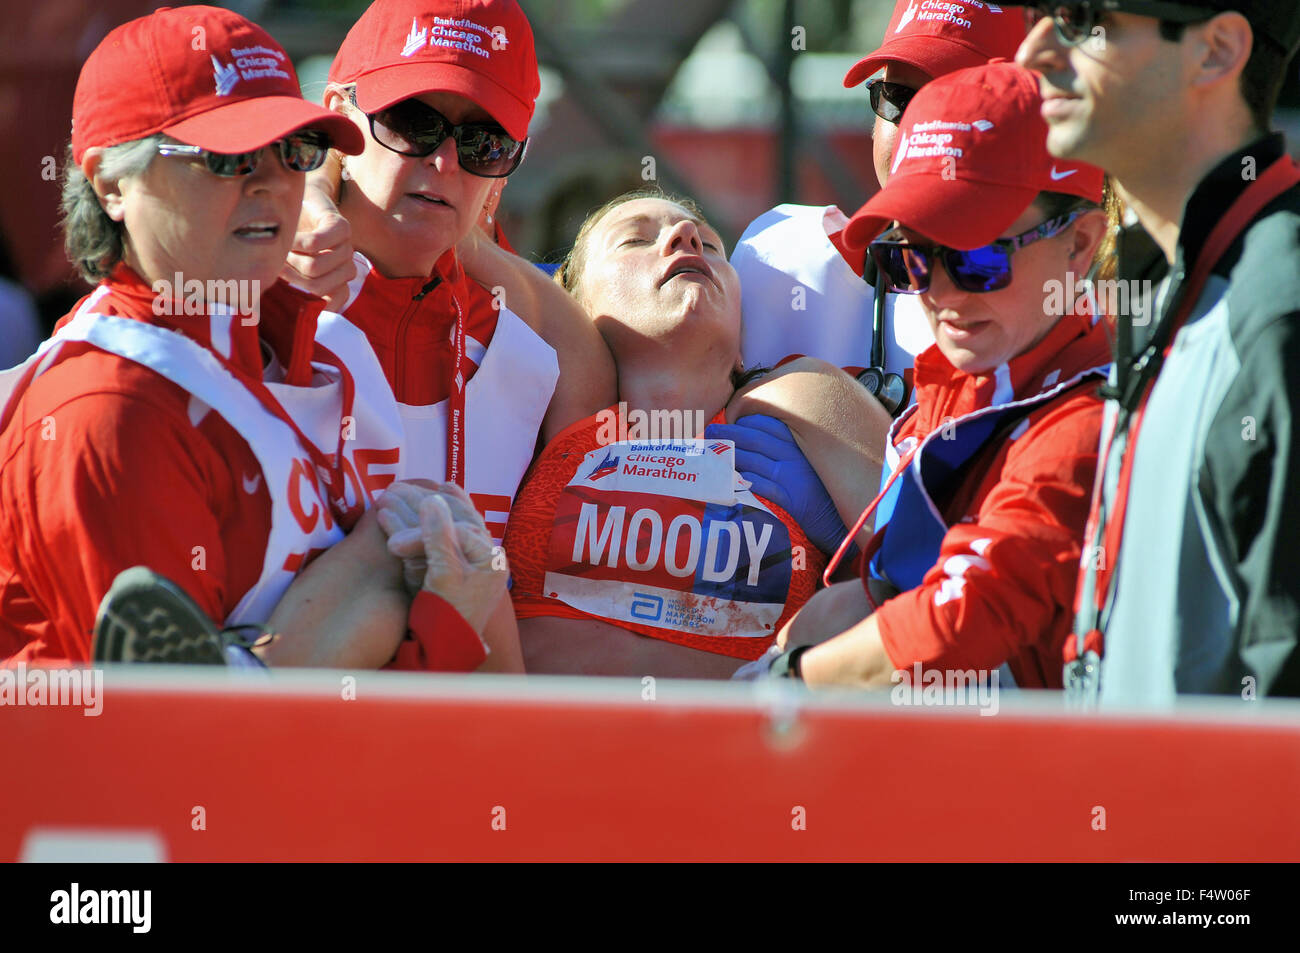 Moments after crossing the finish line and collapsing at the 2015 Chicago Marathon, Tera Moody is carried off the course. Chicago, Illinois, USA. Stock Photo